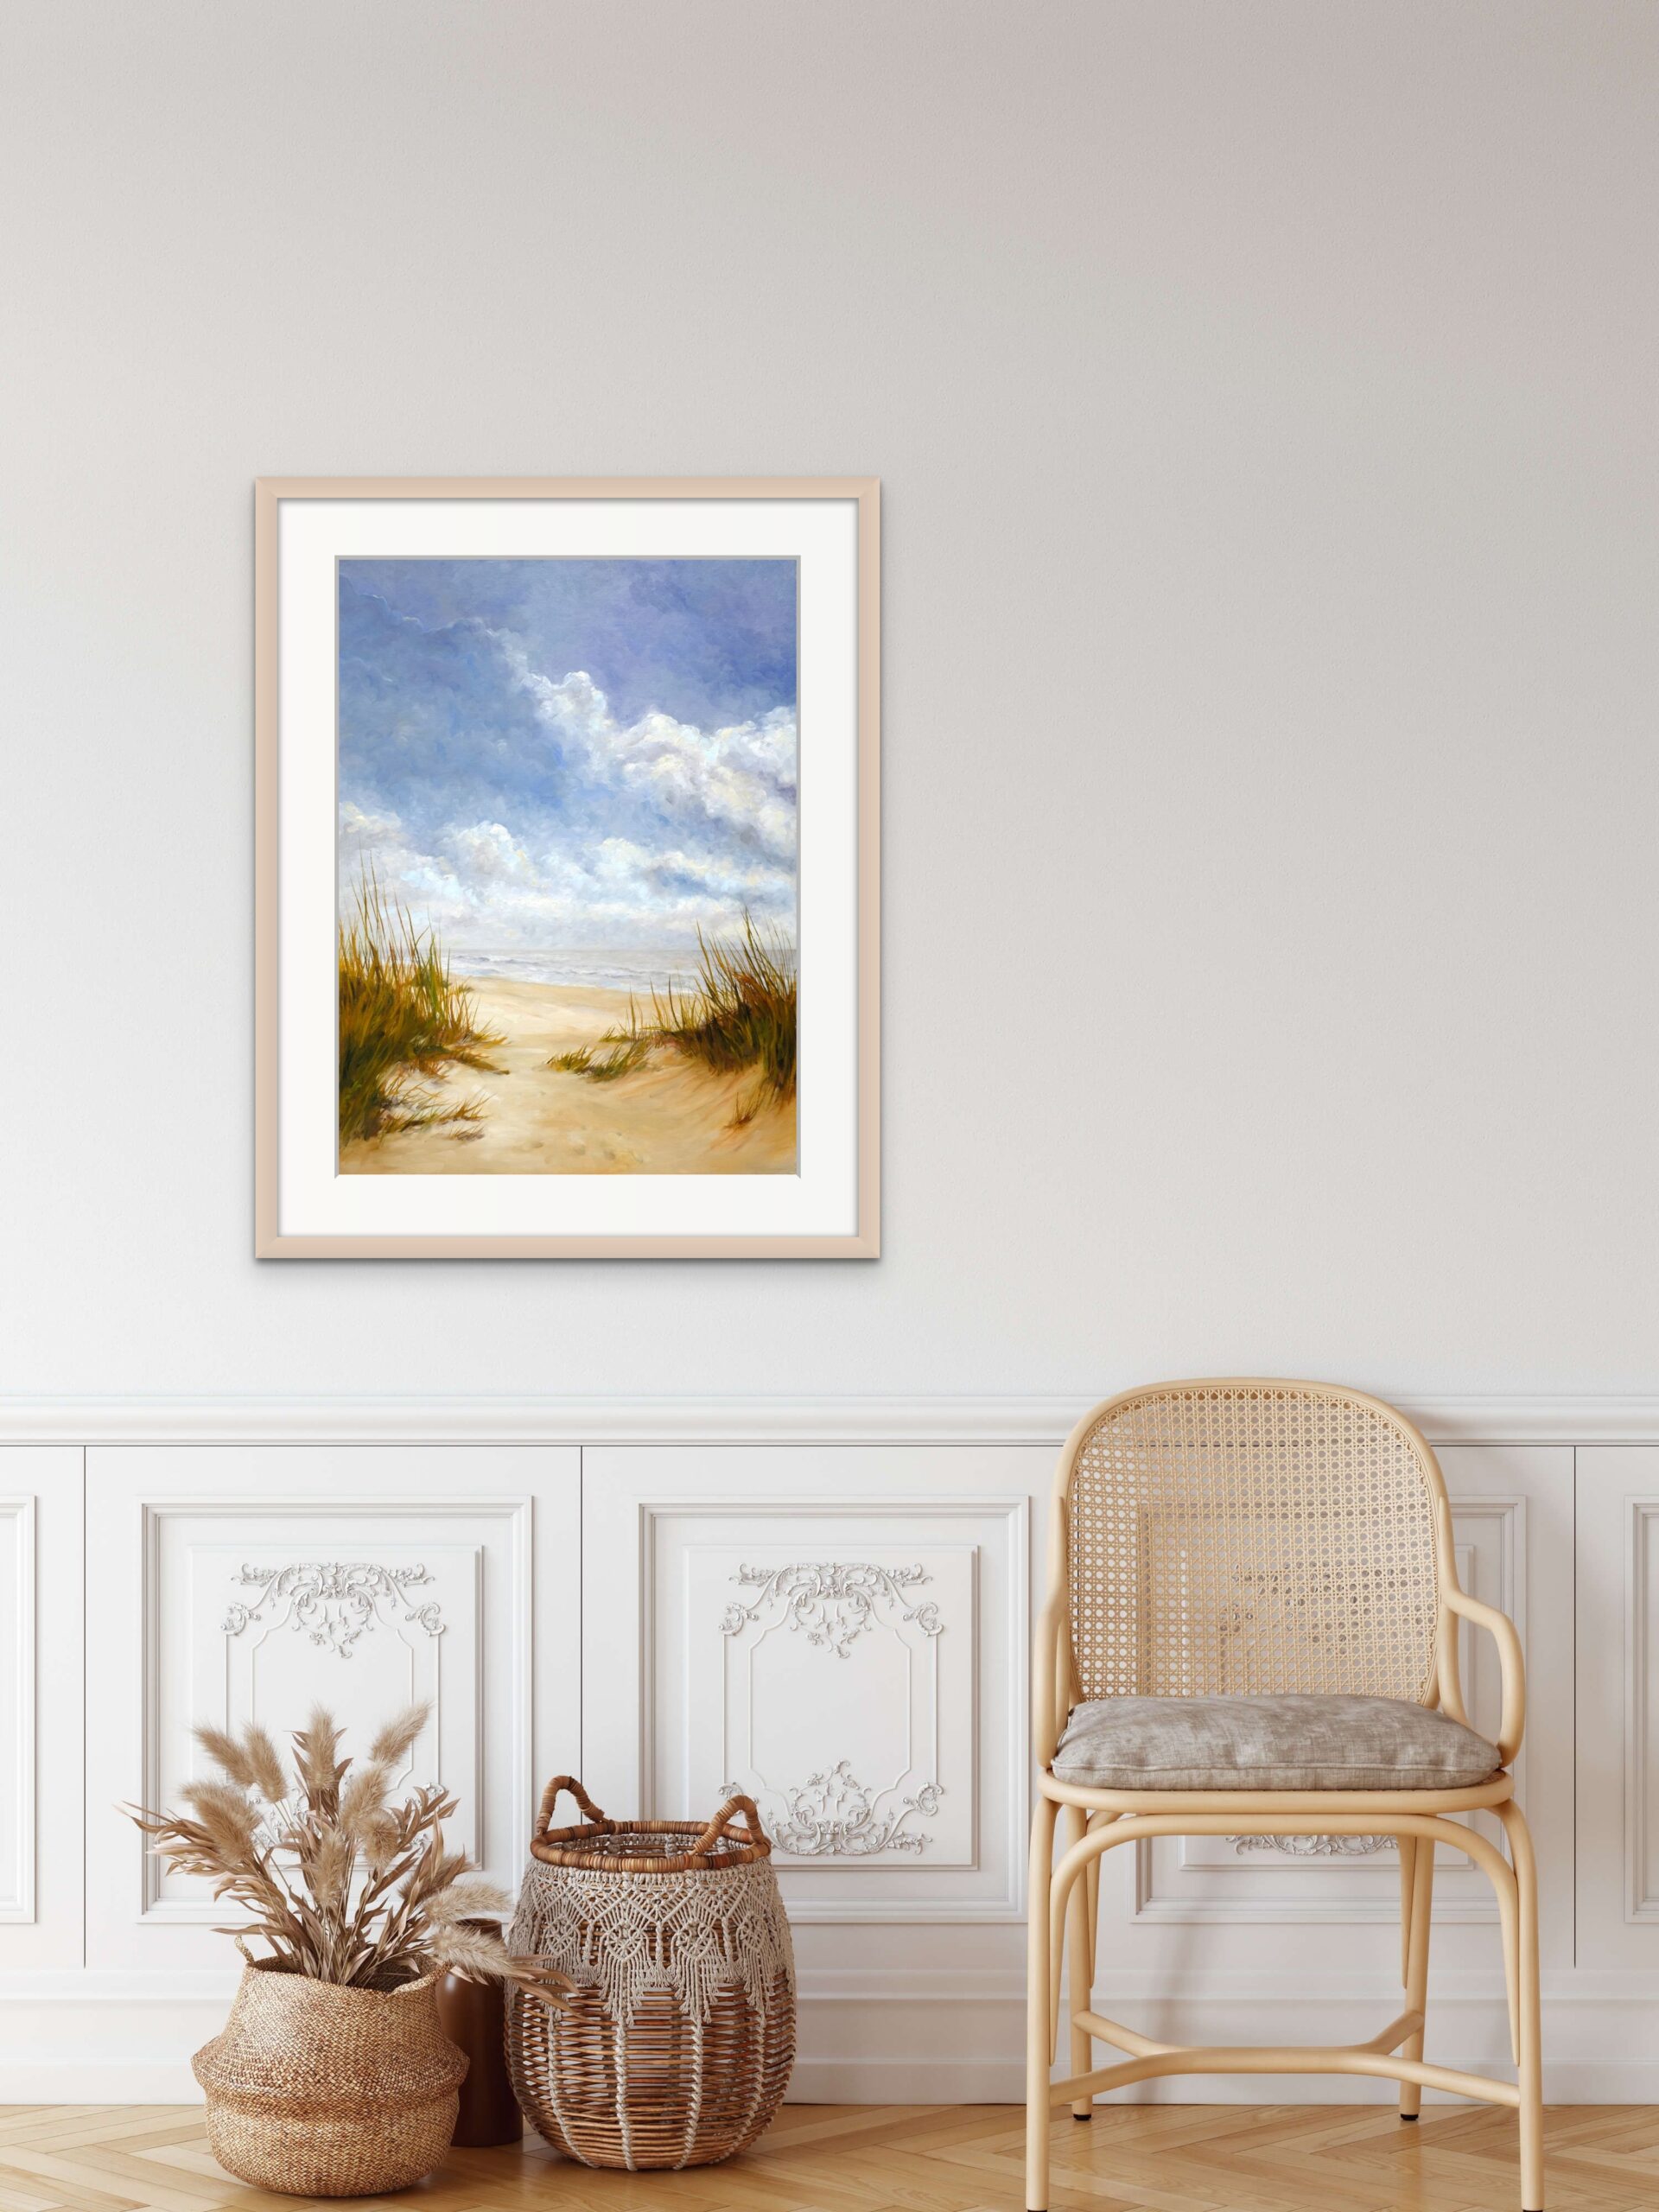 Fly Away with Me painting - this is a print on wall matted and framed